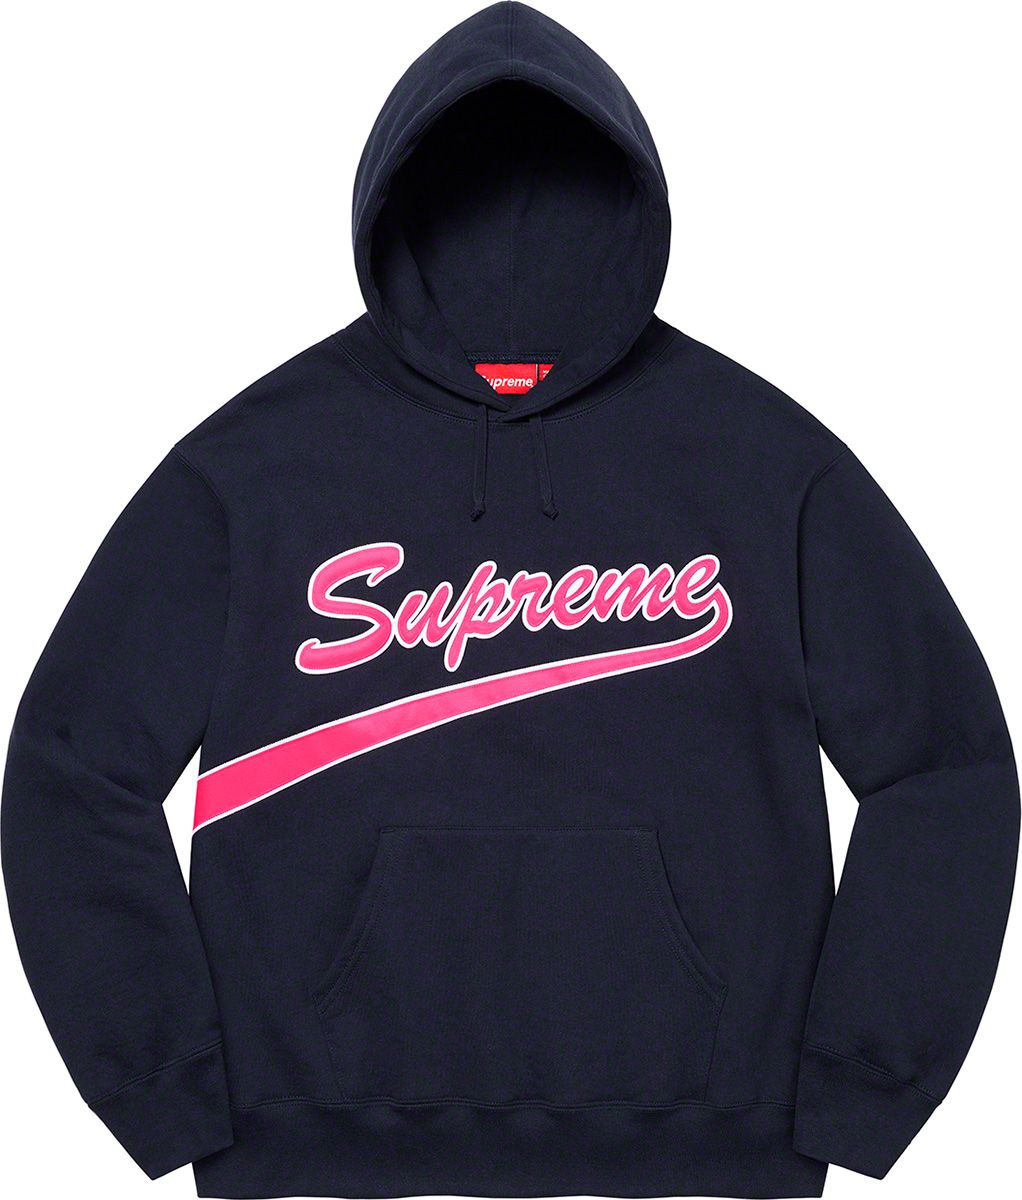 Lady Pink/Supreme Hooded Sweatshirt - Fall/Winter 2021 Preview 